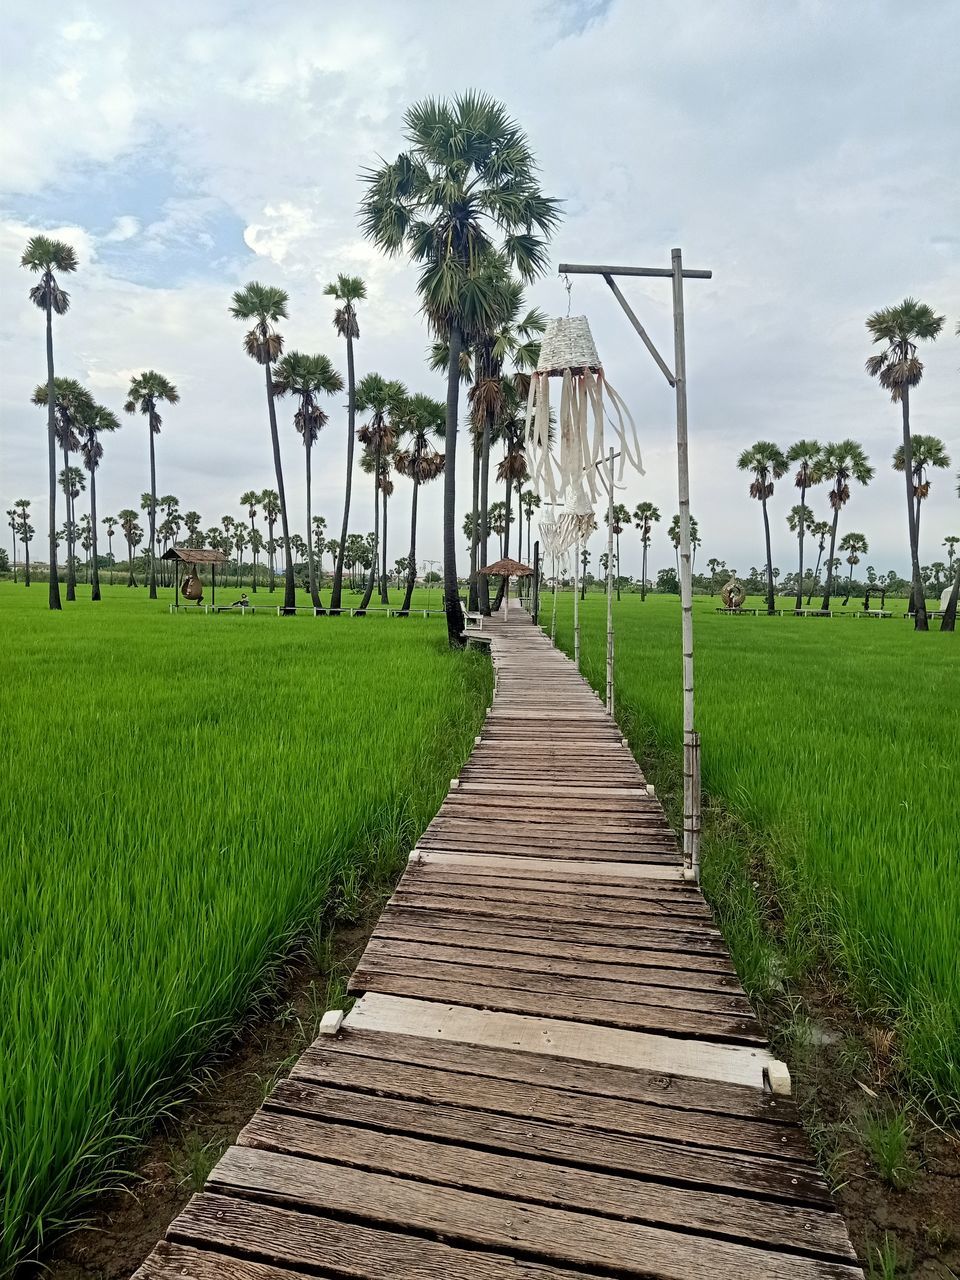 walkway, plant, sky, tropical climate, palm tree, cloud, grass, nature, tree, footpath, land, boardwalk, environment, the way forward, landscape, green, architecture, agriculture, field, beauty in nature, outdoors, no people, travel destinations, rural area, water, diminishing perspective, day, wood, built structure, tranquility, travel, rural scene, scenics - nature, environmental conservation, tropical tree, tourism, trip, coconut palm tree, vacation